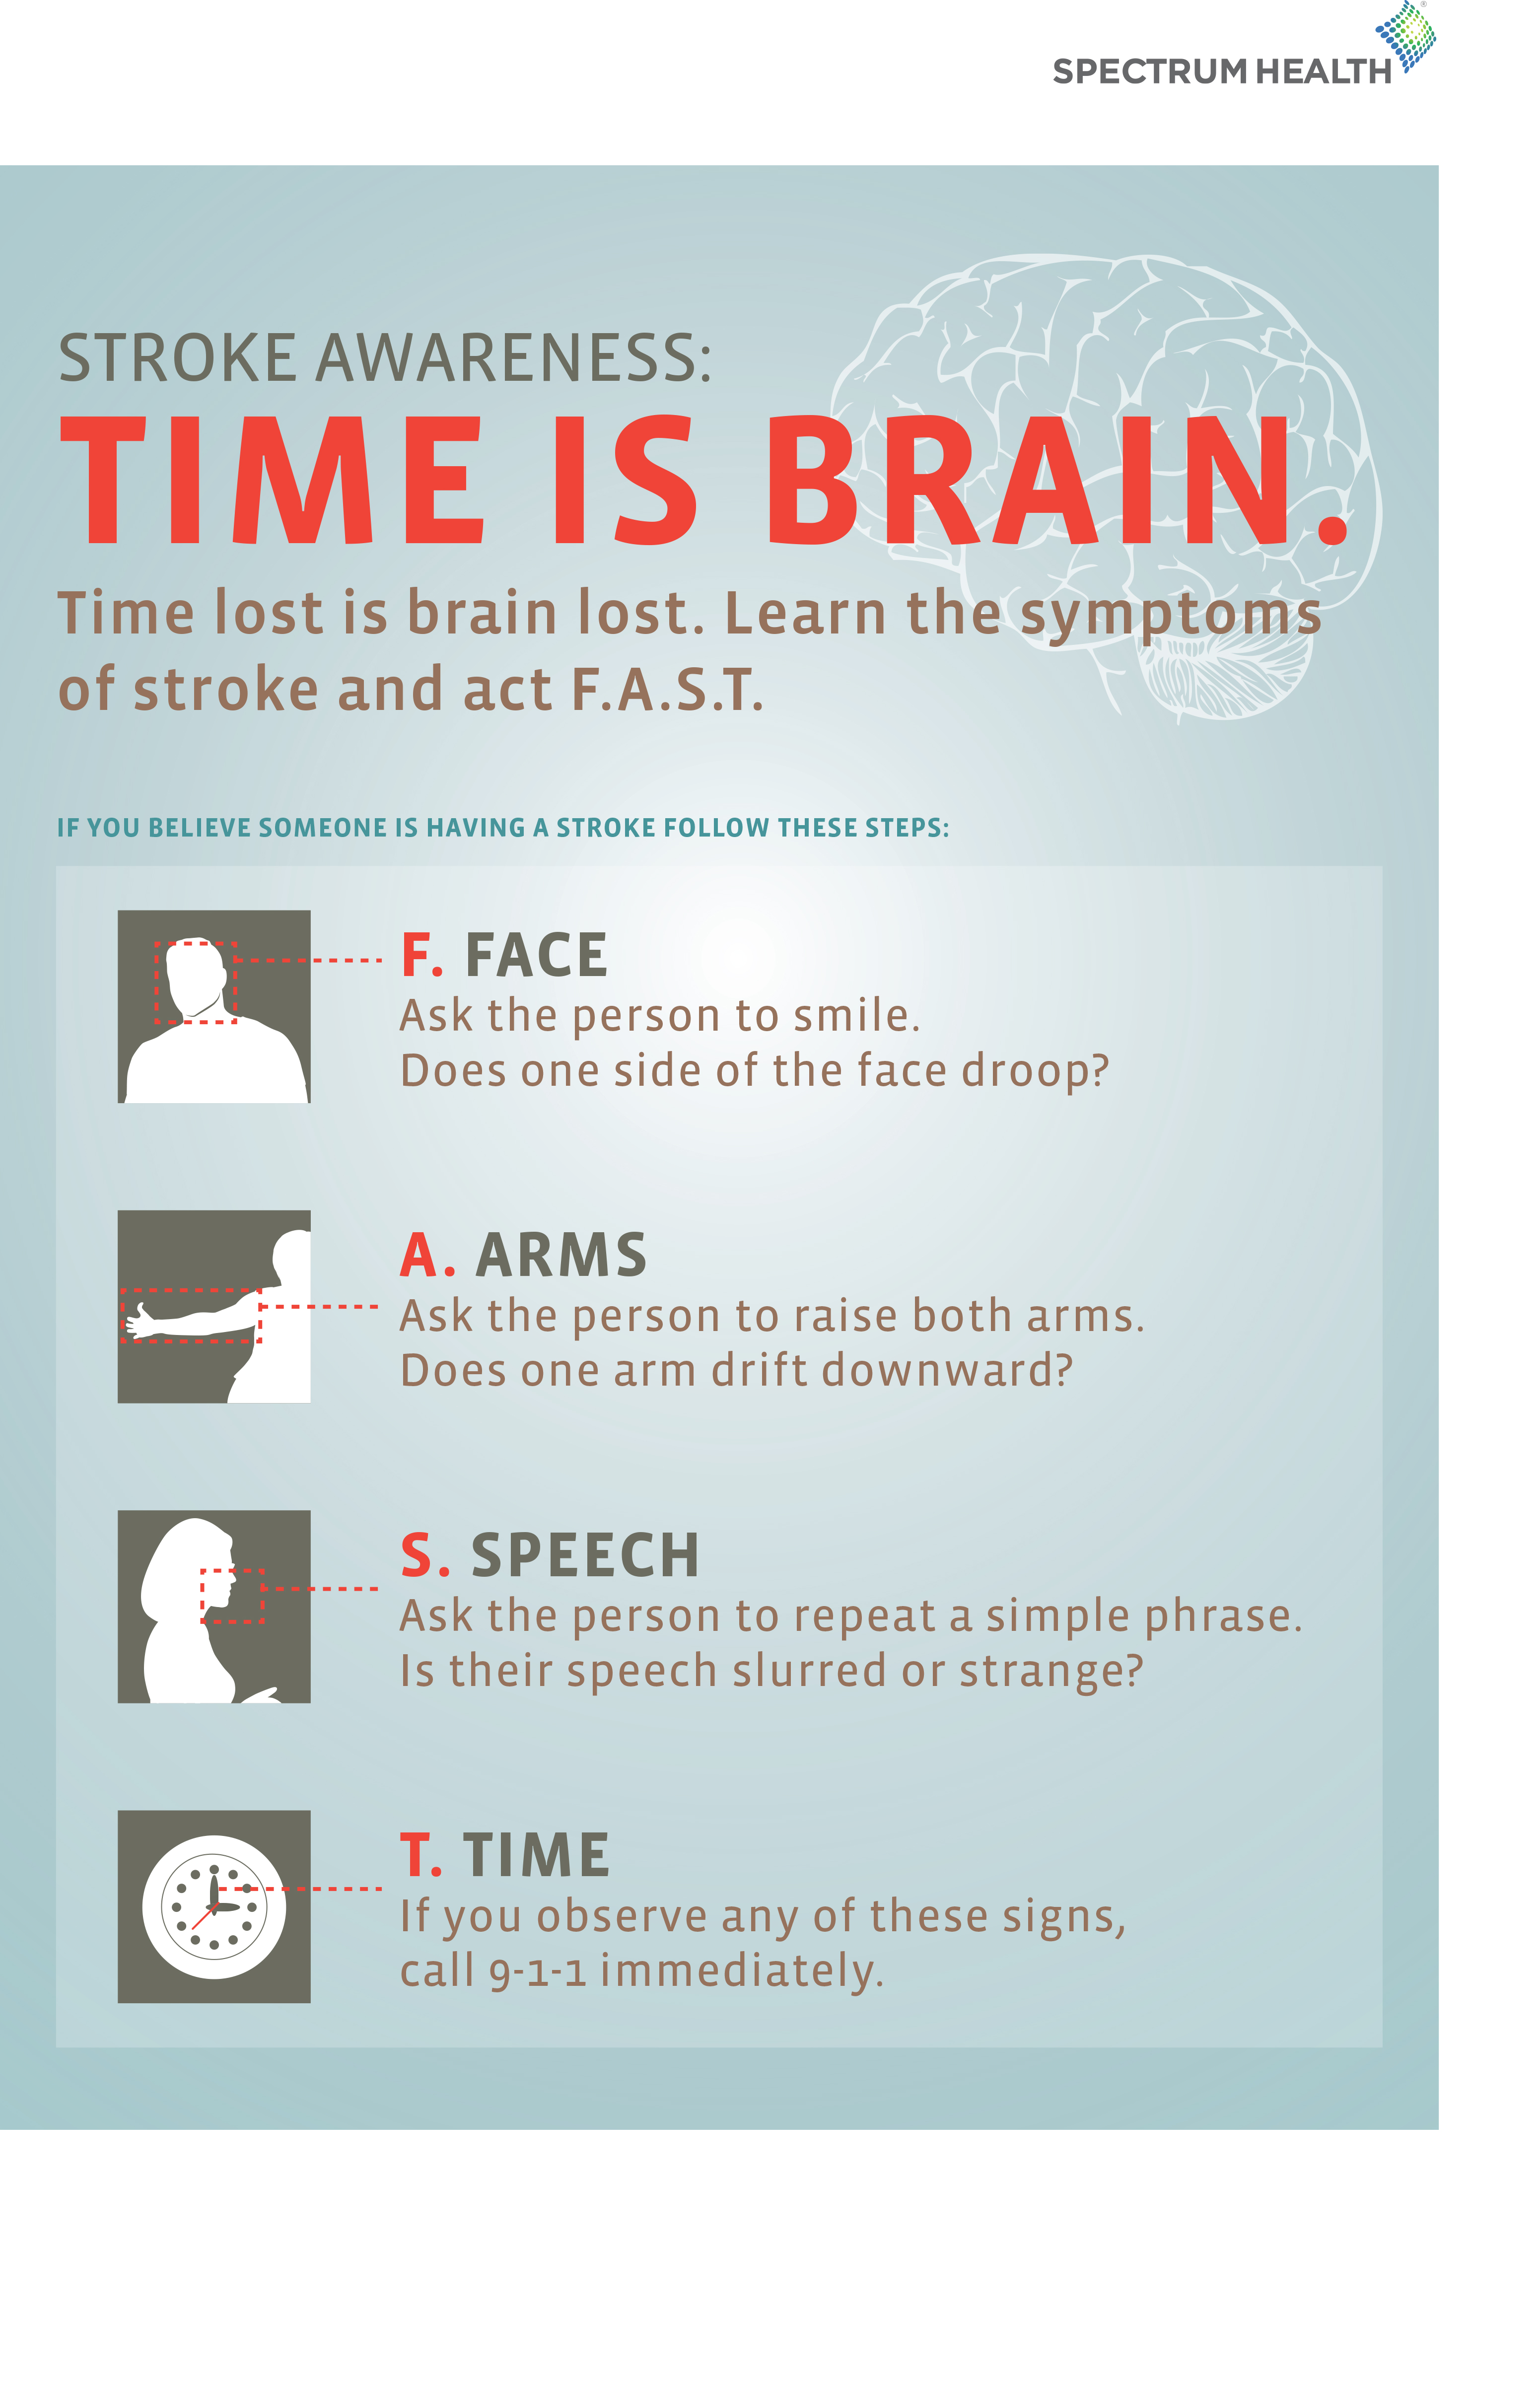 Stroke Awareness - Act F.A.S.T.